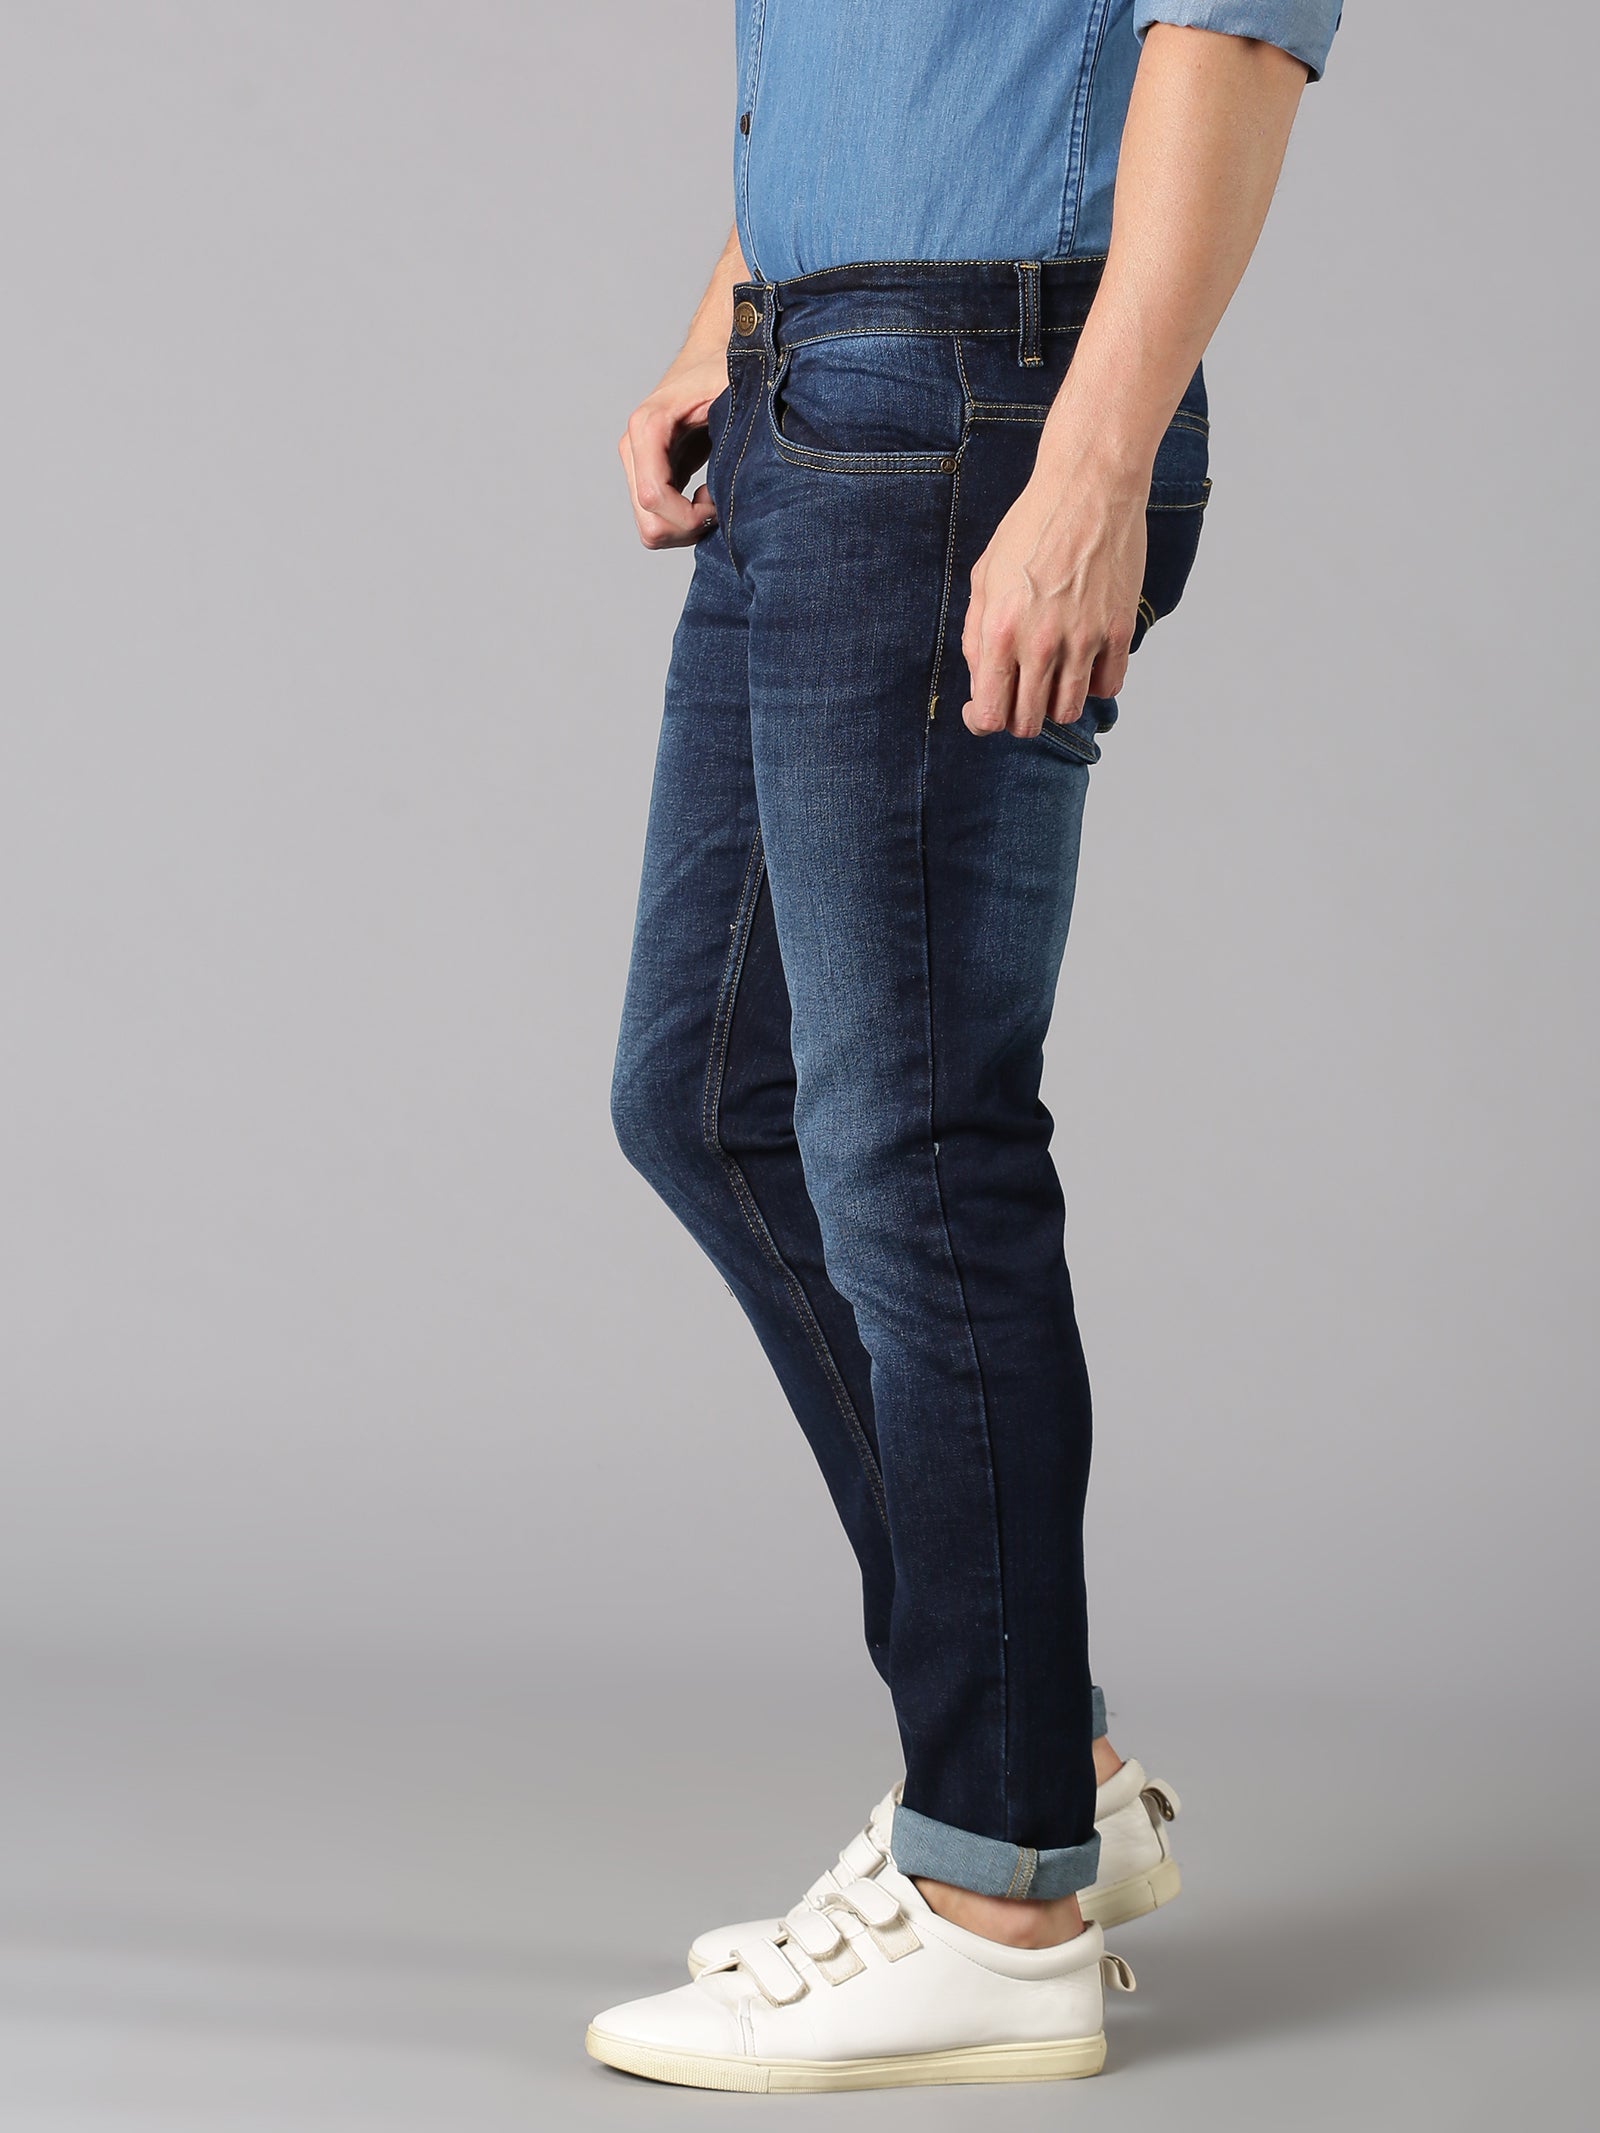 MEN'S NAVY WASHED SLIM FIT JEANS – JDC Store Online Shopping